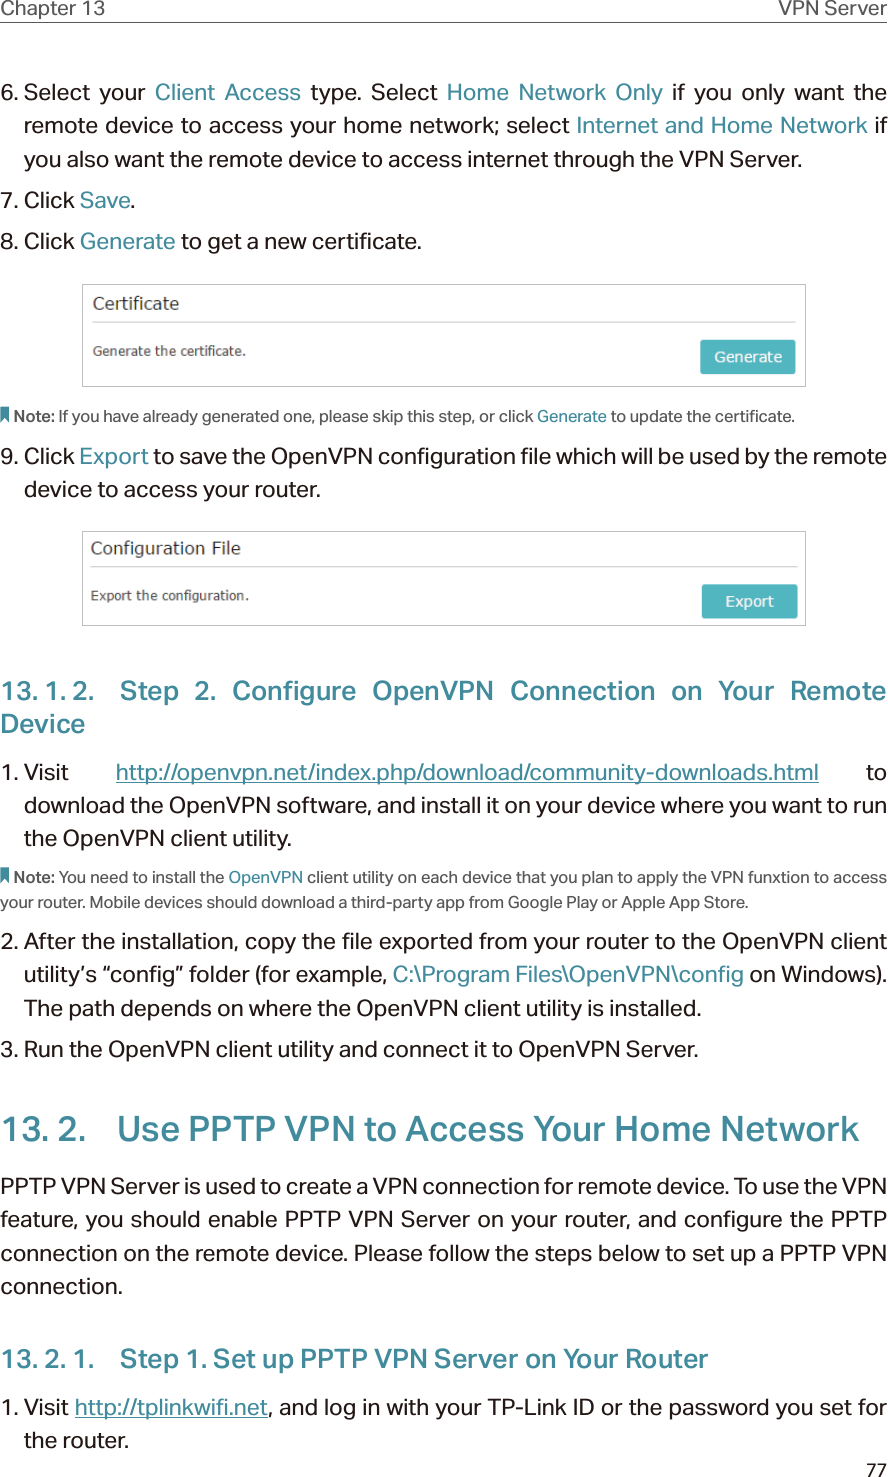 77Chapter 13 VPN Server6. Select  your  Client Access type. Select Home Network Only if you only want the remote device to access your home network; select Internet and Home Network if  you also want the remote device to access internet through the VPN Server.7. Click Save.8. Click Generate to get a new certificate. Note: If you have already generated one, please skip this step, or click Generate to update the certificate.9. Click Export to save the OpenVPN configuration file which will be used by the remote device to access your router.13. 1. 2.  Step 2. Configure OpenVPN Connection on Your Remote Device1. Visit  http://openvpn.net/index.php/download/community-downloads.html to download the OpenVPN software, and install it on your device where you want to run the OpenVPN client utility.Note: You need to install the OpenVPN client utility on each device that you plan to apply the VPN funxtion to access your router. Mobile devices should download a third-party app from Google Play or Apple App Store.2. After the installation, copy the file exported from your router to the OpenVPN client utility’s “config” folder (for example, C:\Program Files\OpenVPN\config on Windows). The path depends on where the OpenVPN client utility is installed.3. Run the OpenVPN client utility and connect it to OpenVPN Server.13. 2.  Use PPTP VPN to Access Your Home NetworkPPTP VPN Server is used to create a VPN connection for remote device. To use the VPN feature, you should enable PPTP VPN Server on your router, and configure the PPTP connection on the remote device. Please follow the steps below to set up a PPTP VPN connection.13. 2. 1.  Step 1. Set up PPTP VPN Server on Your Router1. Visit http://tplinkwifi.net, and log in with your TP-Link ID or the password you set for the router.